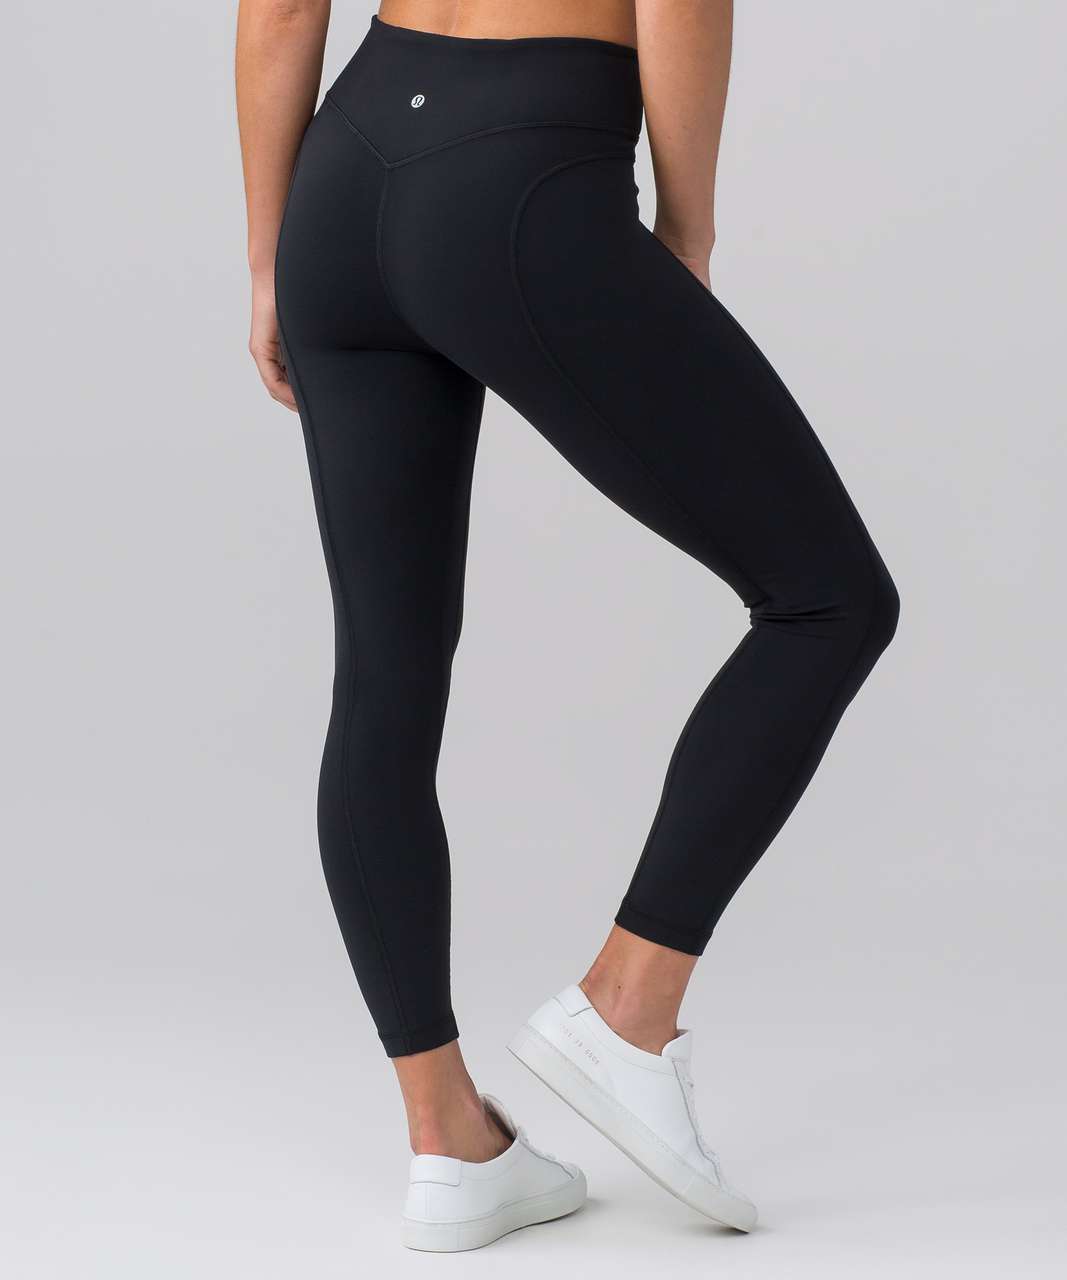 Lululemon Pushing Limits 7/8 Tight (Nulu 25") - Black (First Release)